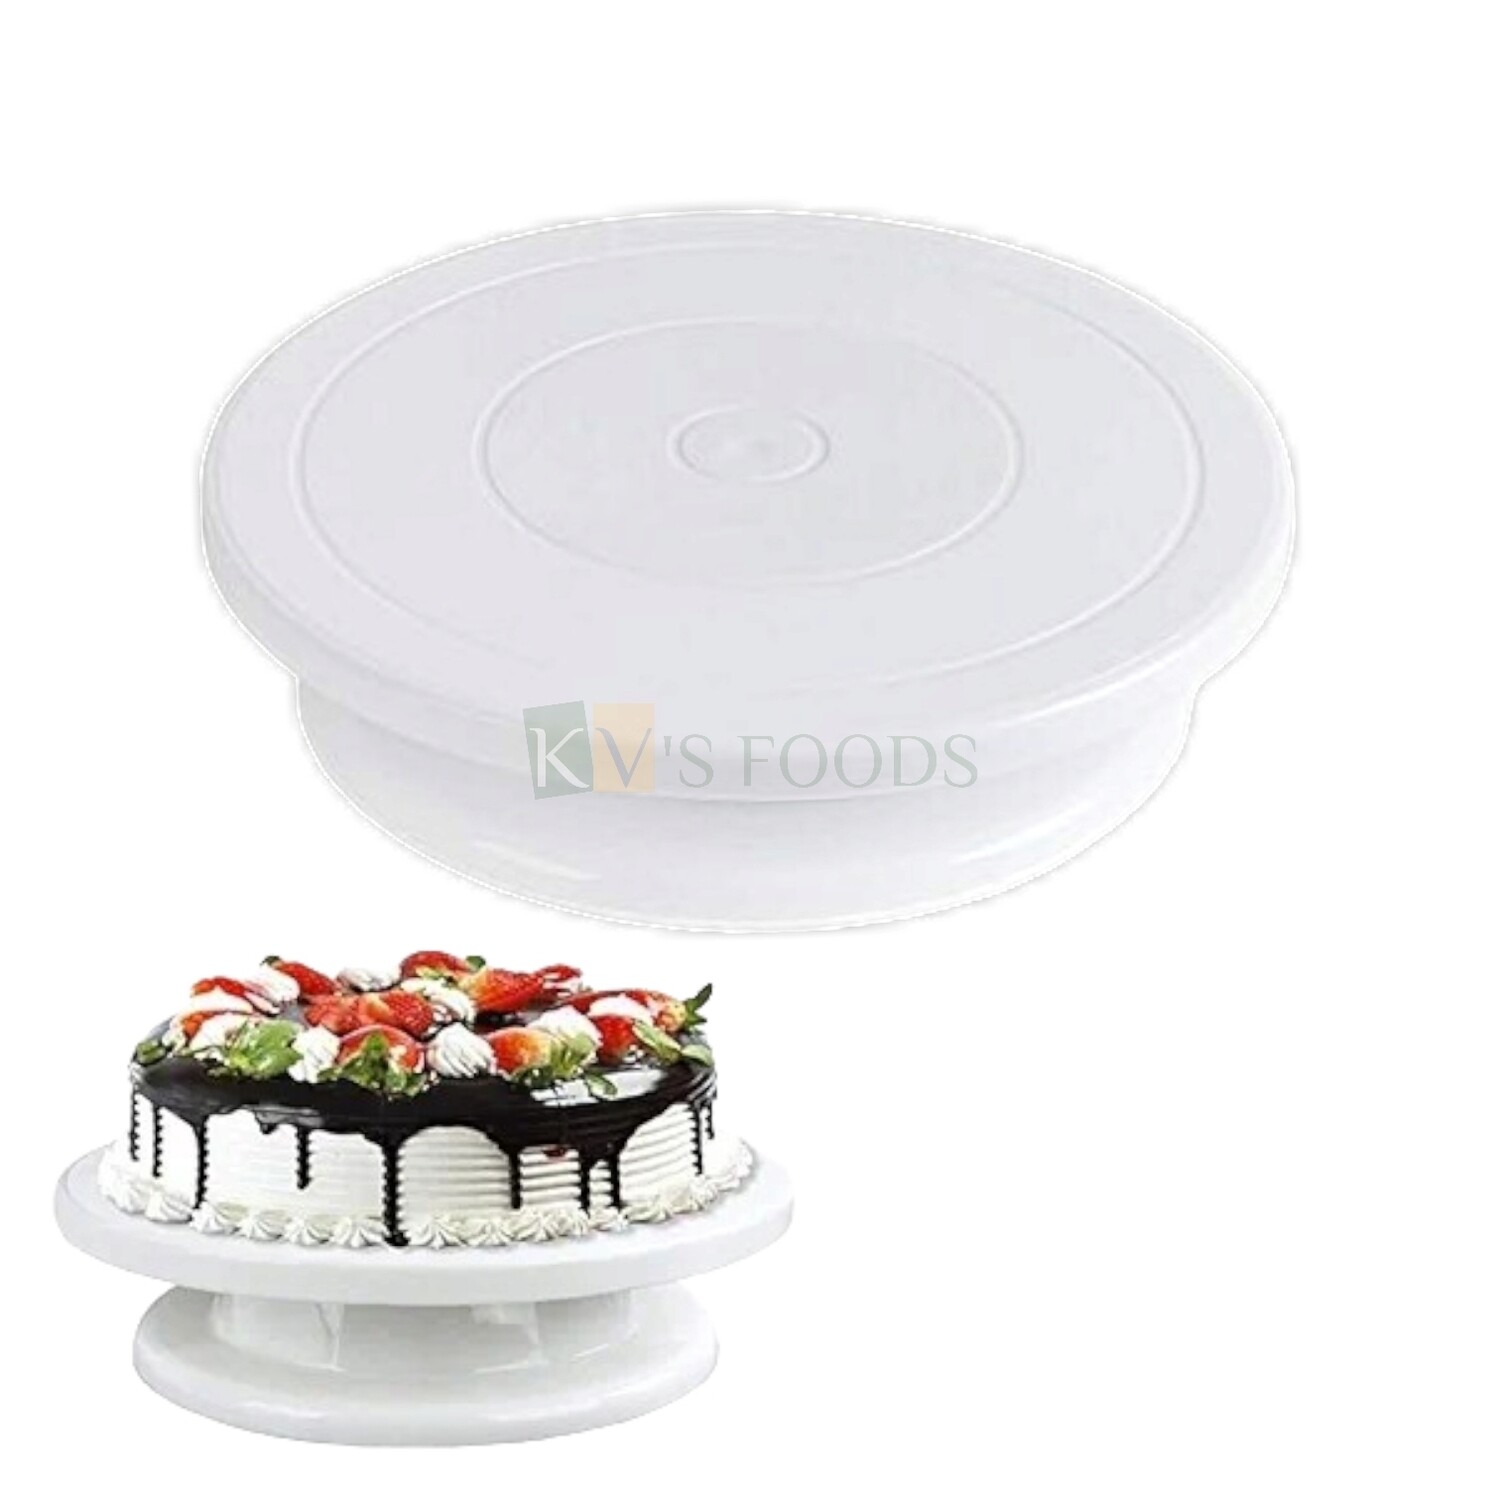 1PC 360° Smooth Rotating Cake Turntable Diameter 11 Inch, Height 2.7 Inch for Cakes, Cupcakes Decorating Supplies Shaping Cakes Display Presentation Serving Stands, Nonslip Base, Kitchen Accessories